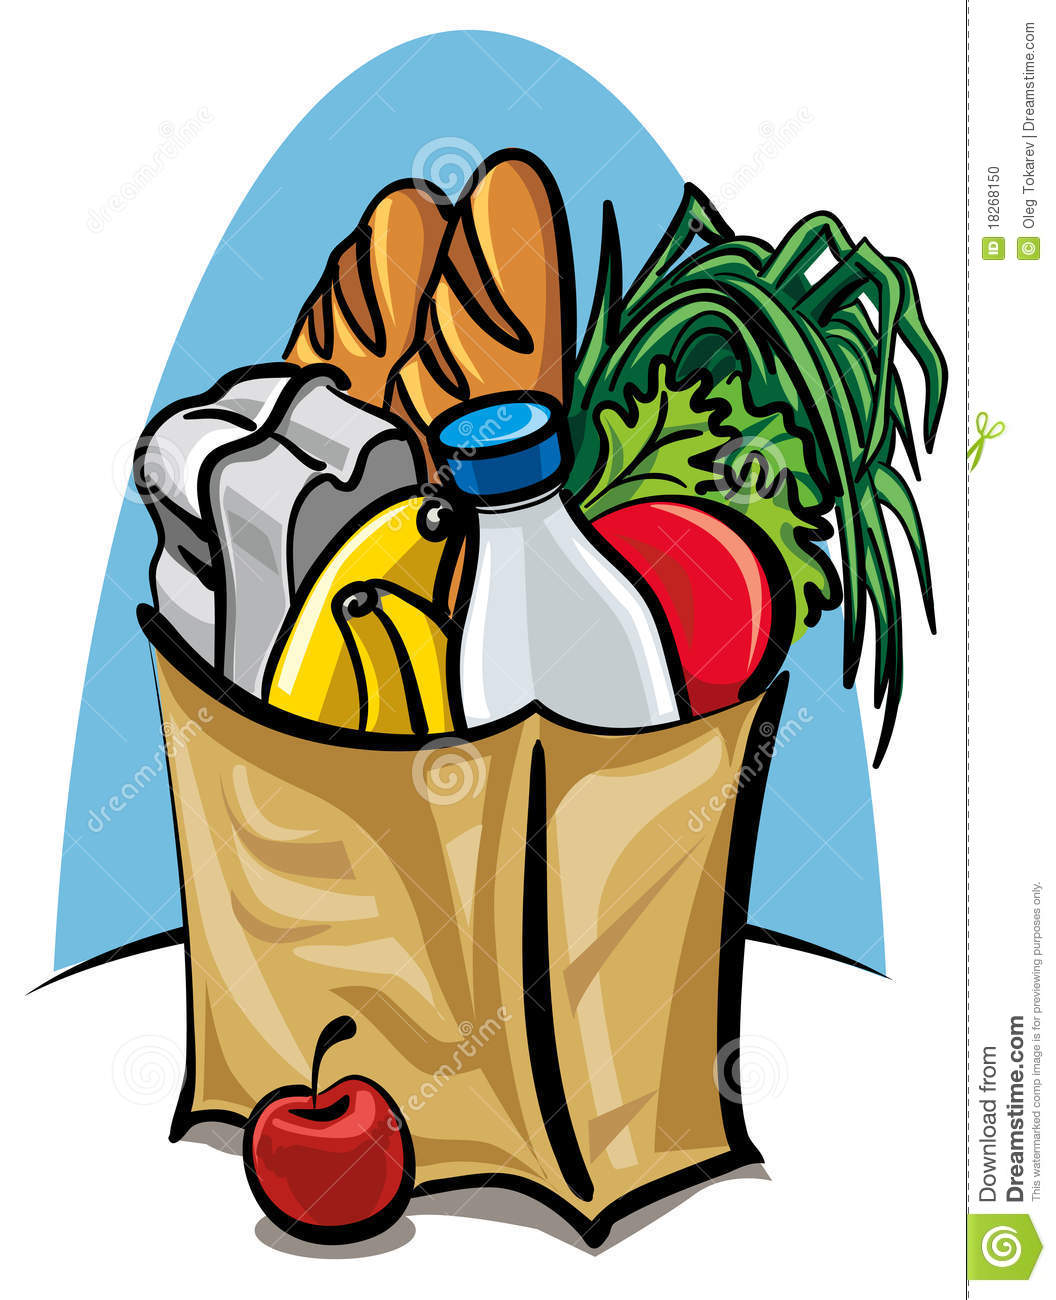 grocery clipart groceries